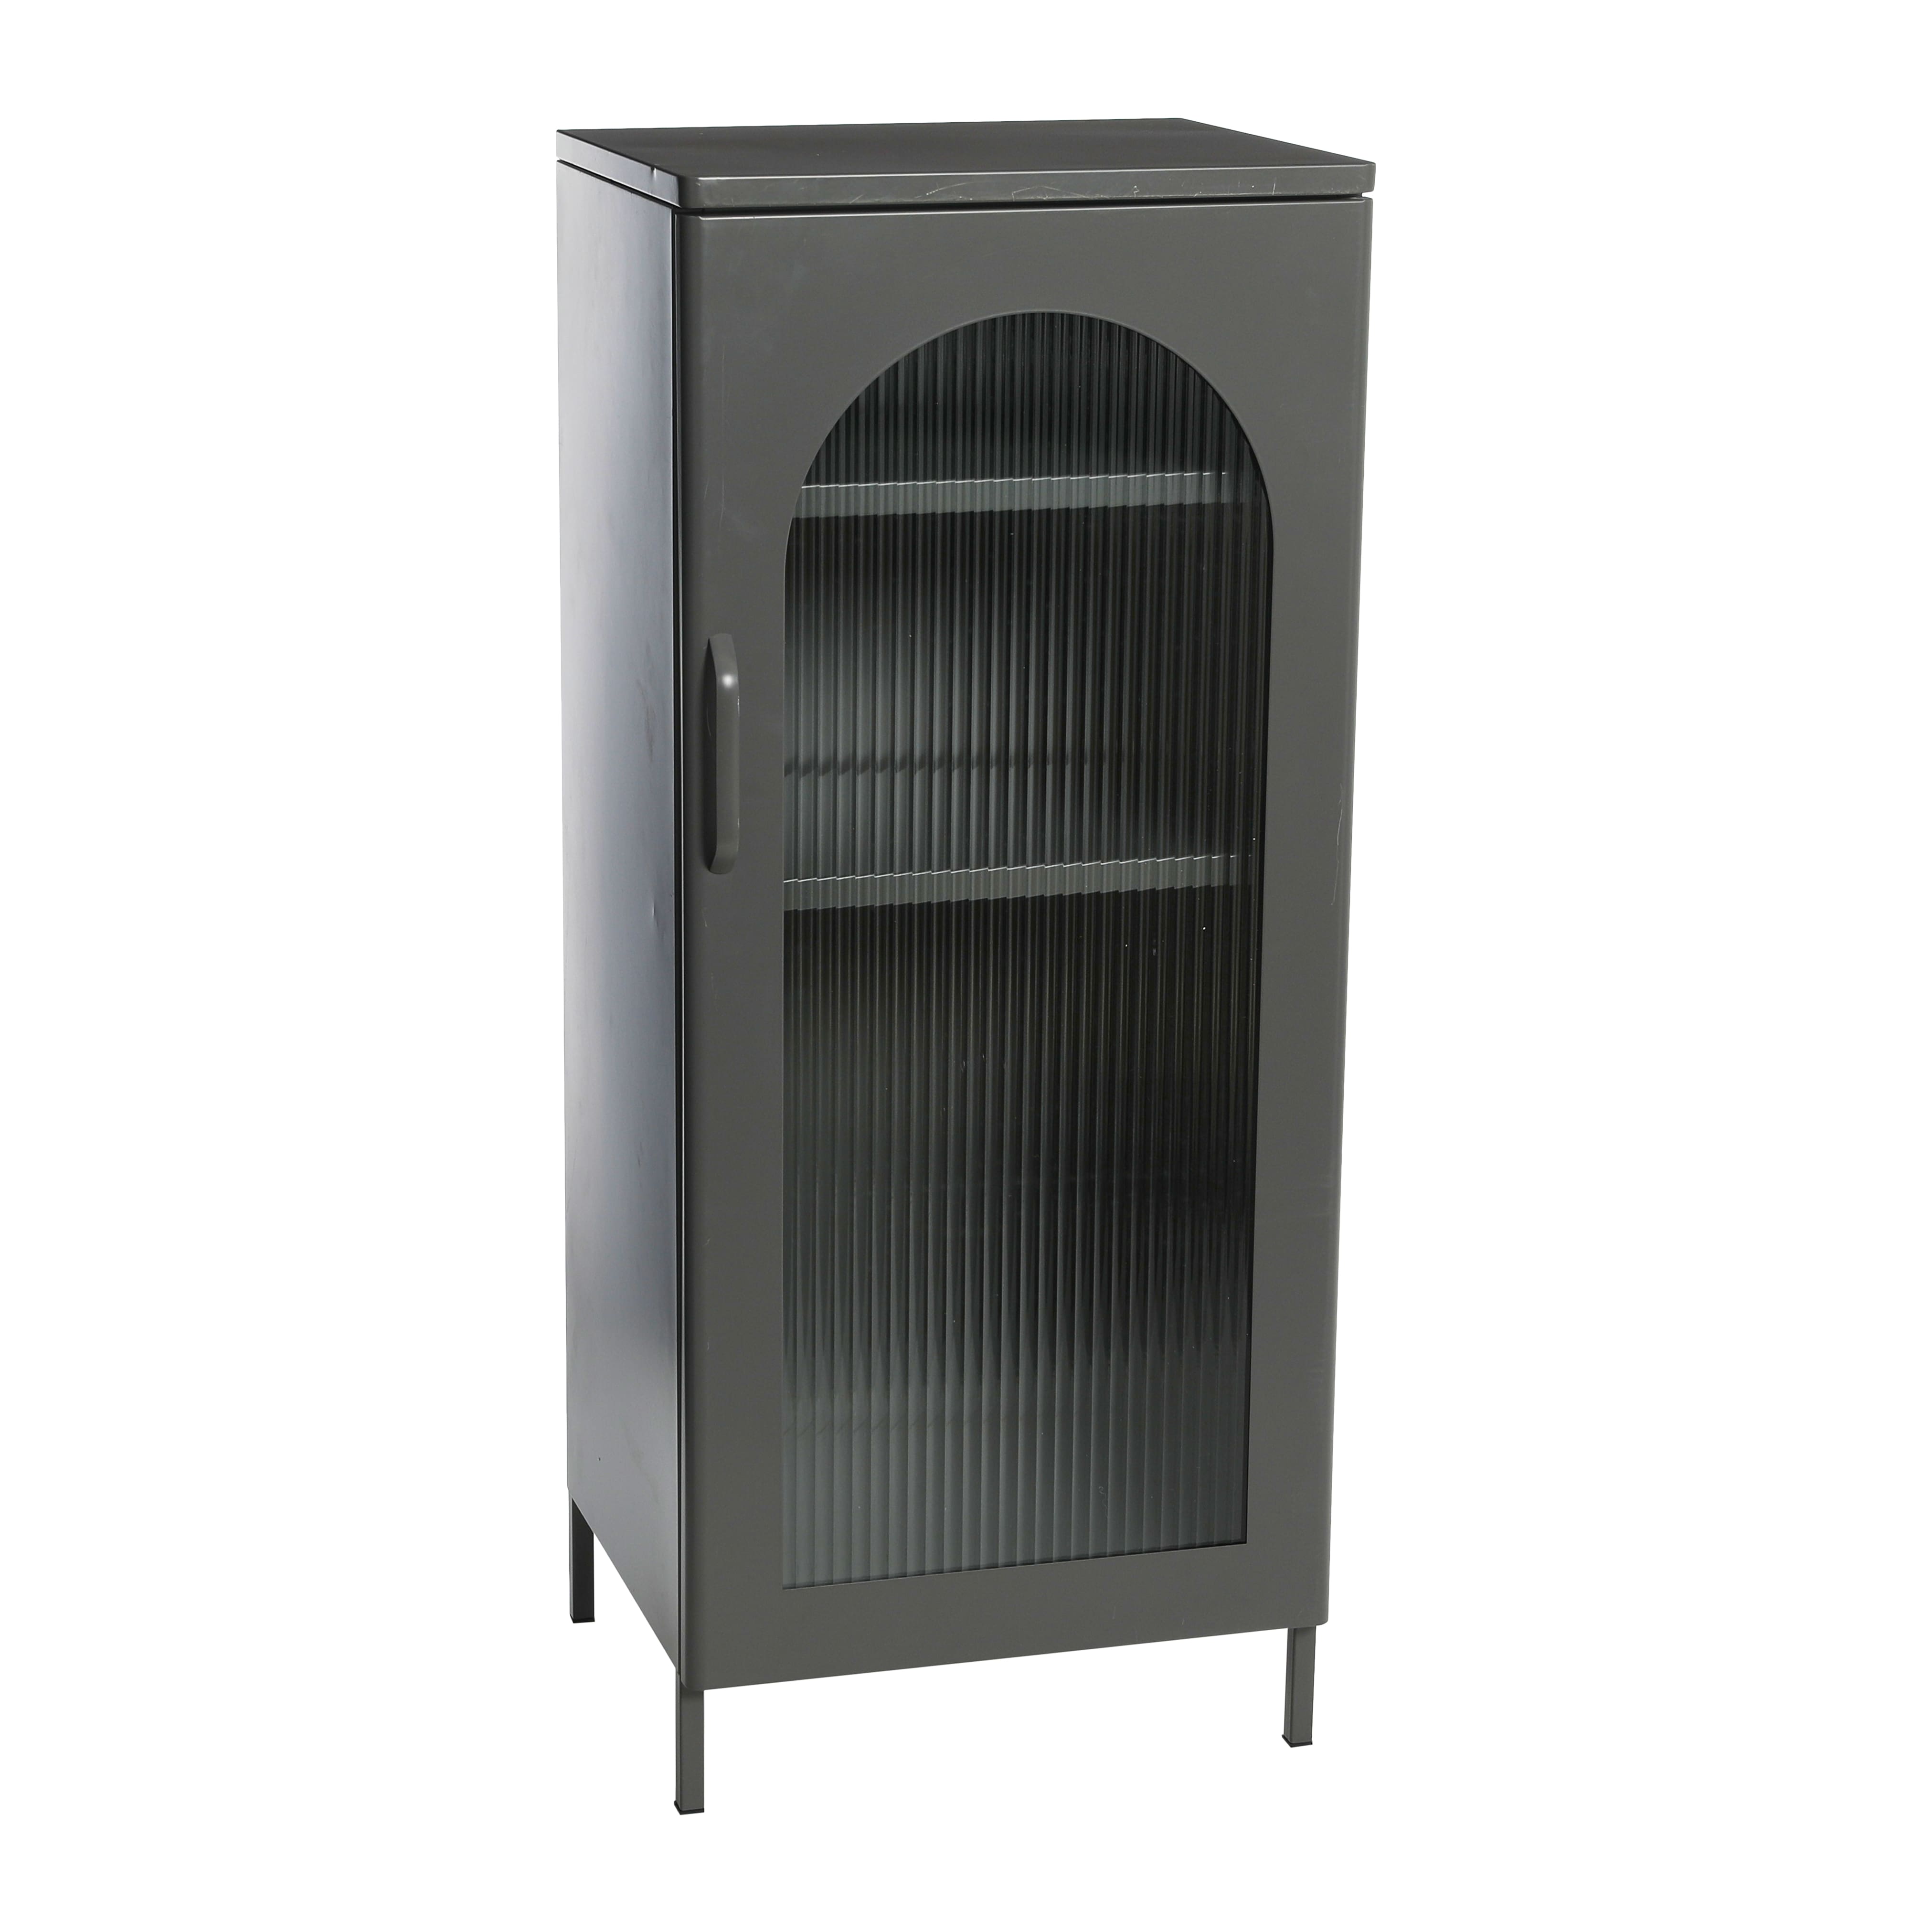 40" Solstice Narrow Metal Accent Cabinet with Adjustable Storage Shelves and Arched Glass Door